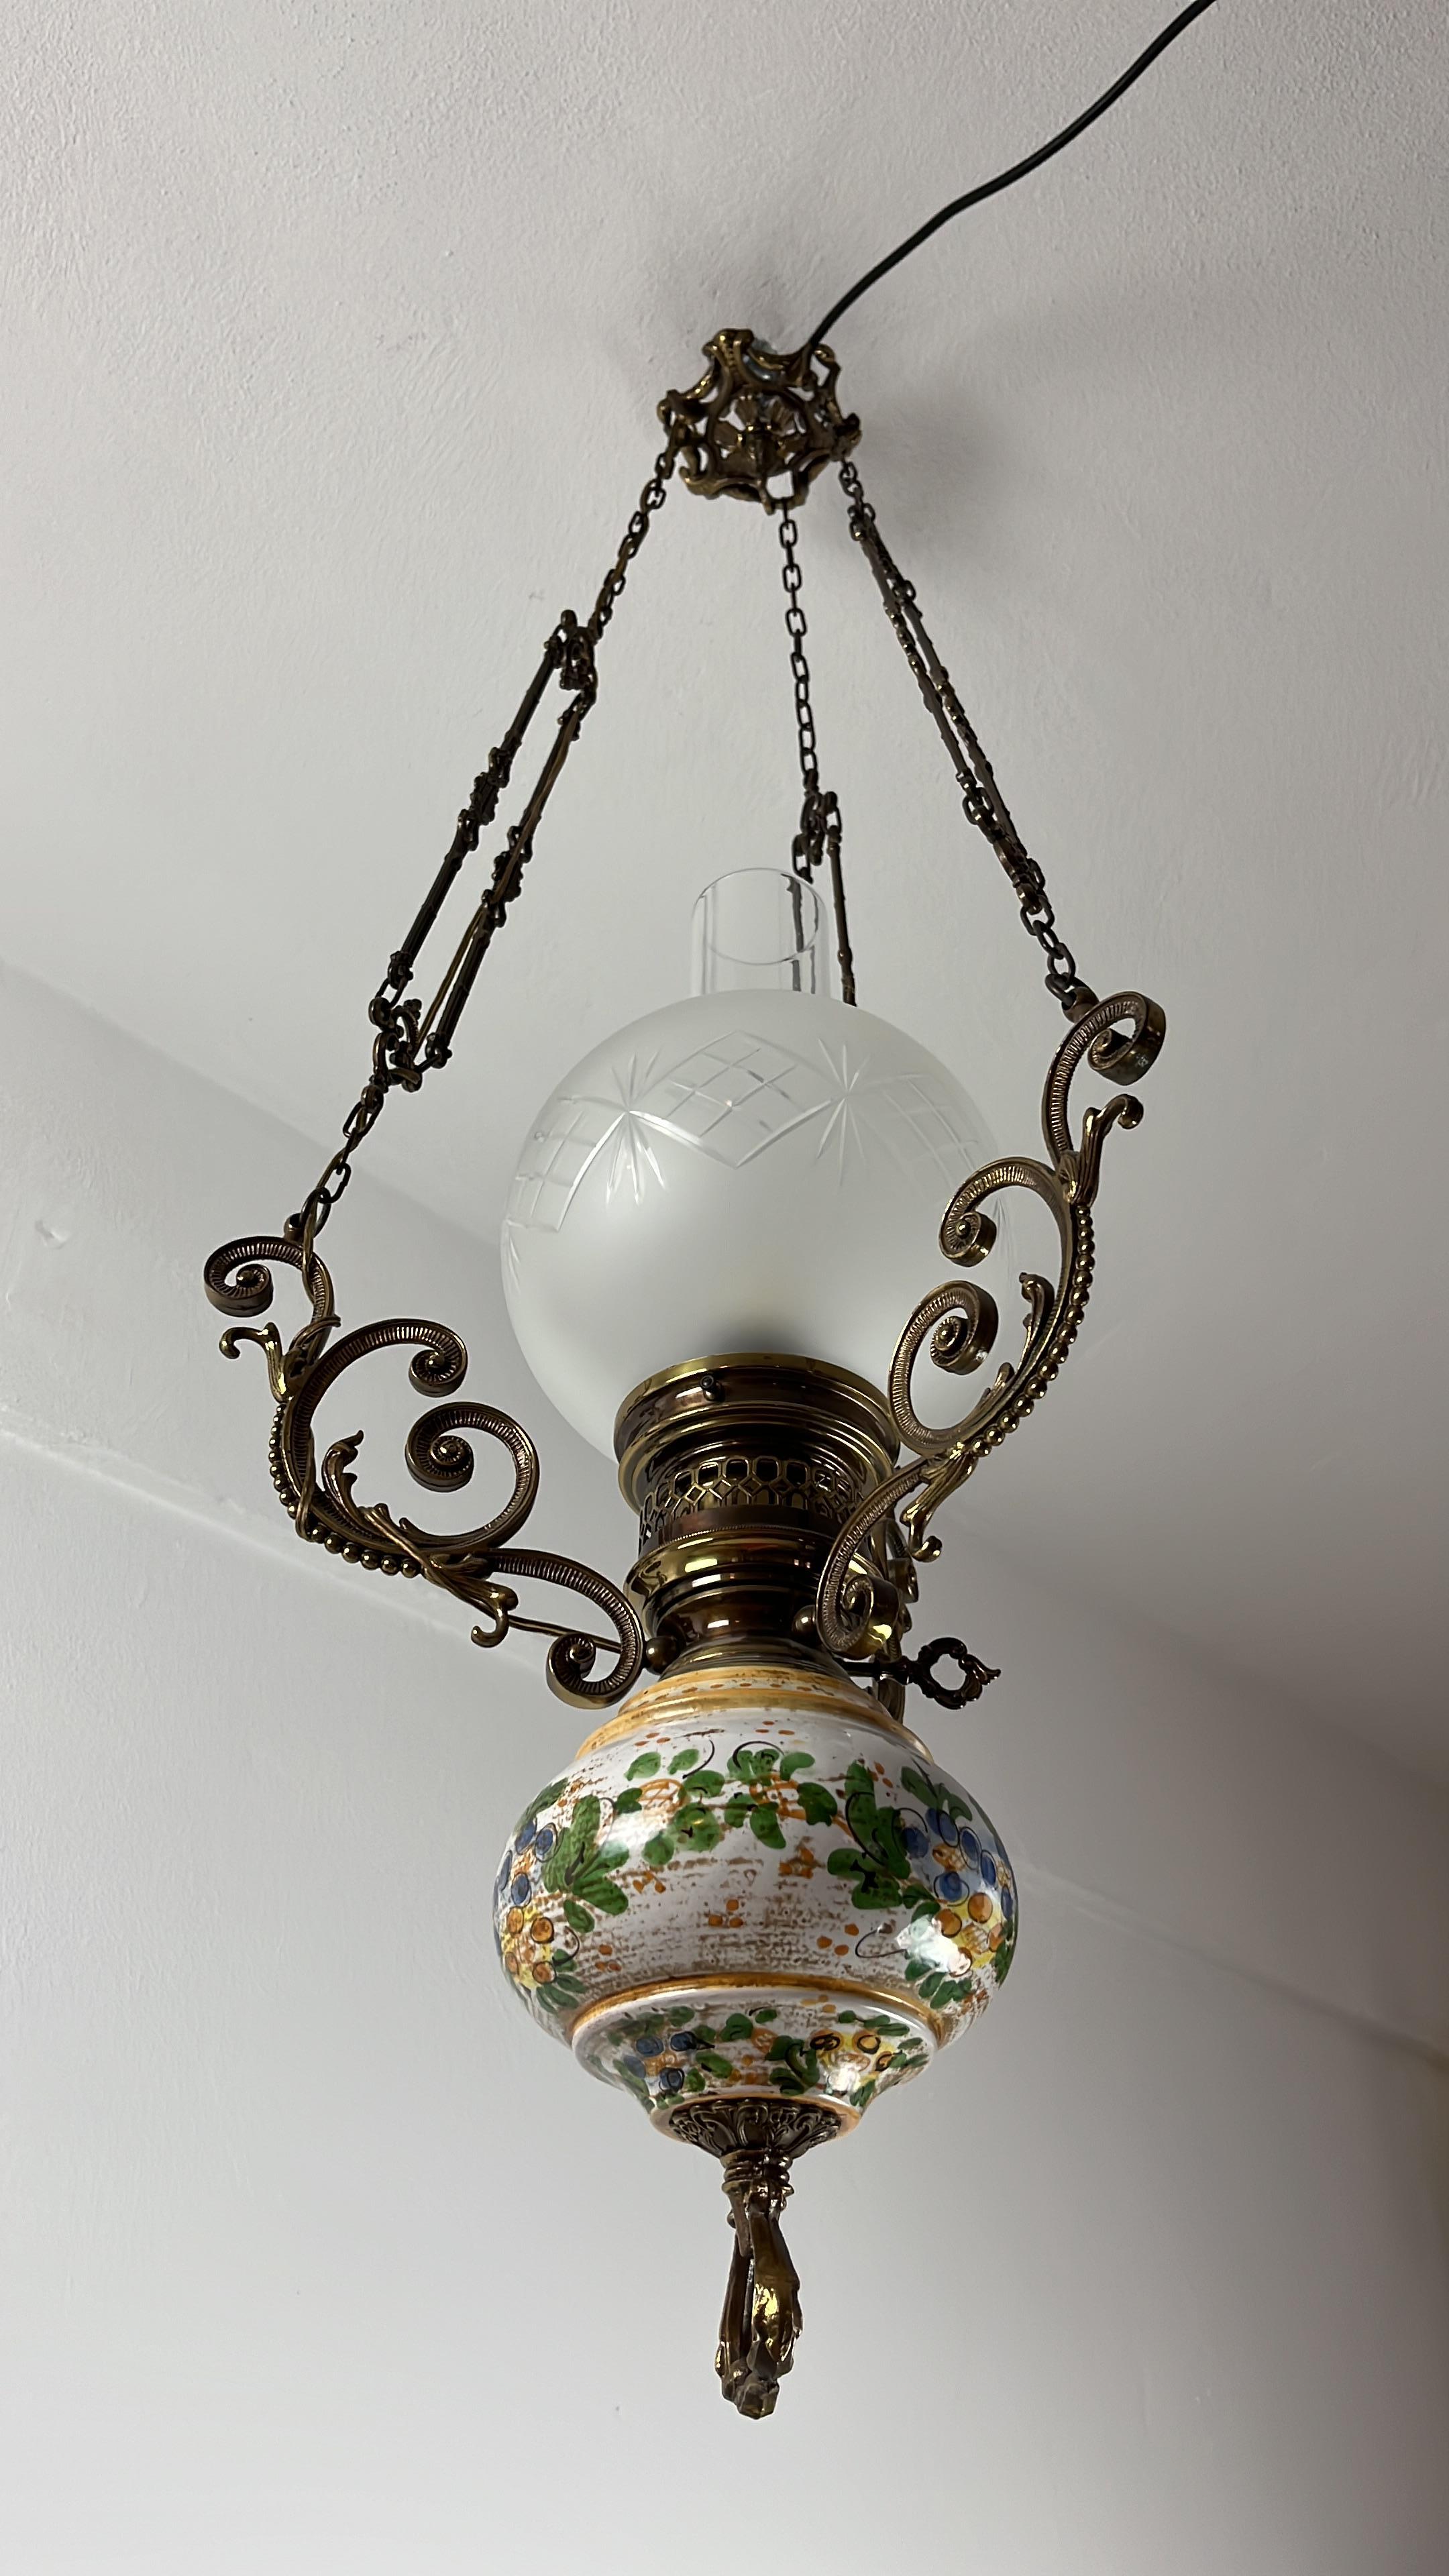 Bronze, ceramic and glass chandelier, Italy, 1950s
Intact and functioning.
Good conditions.